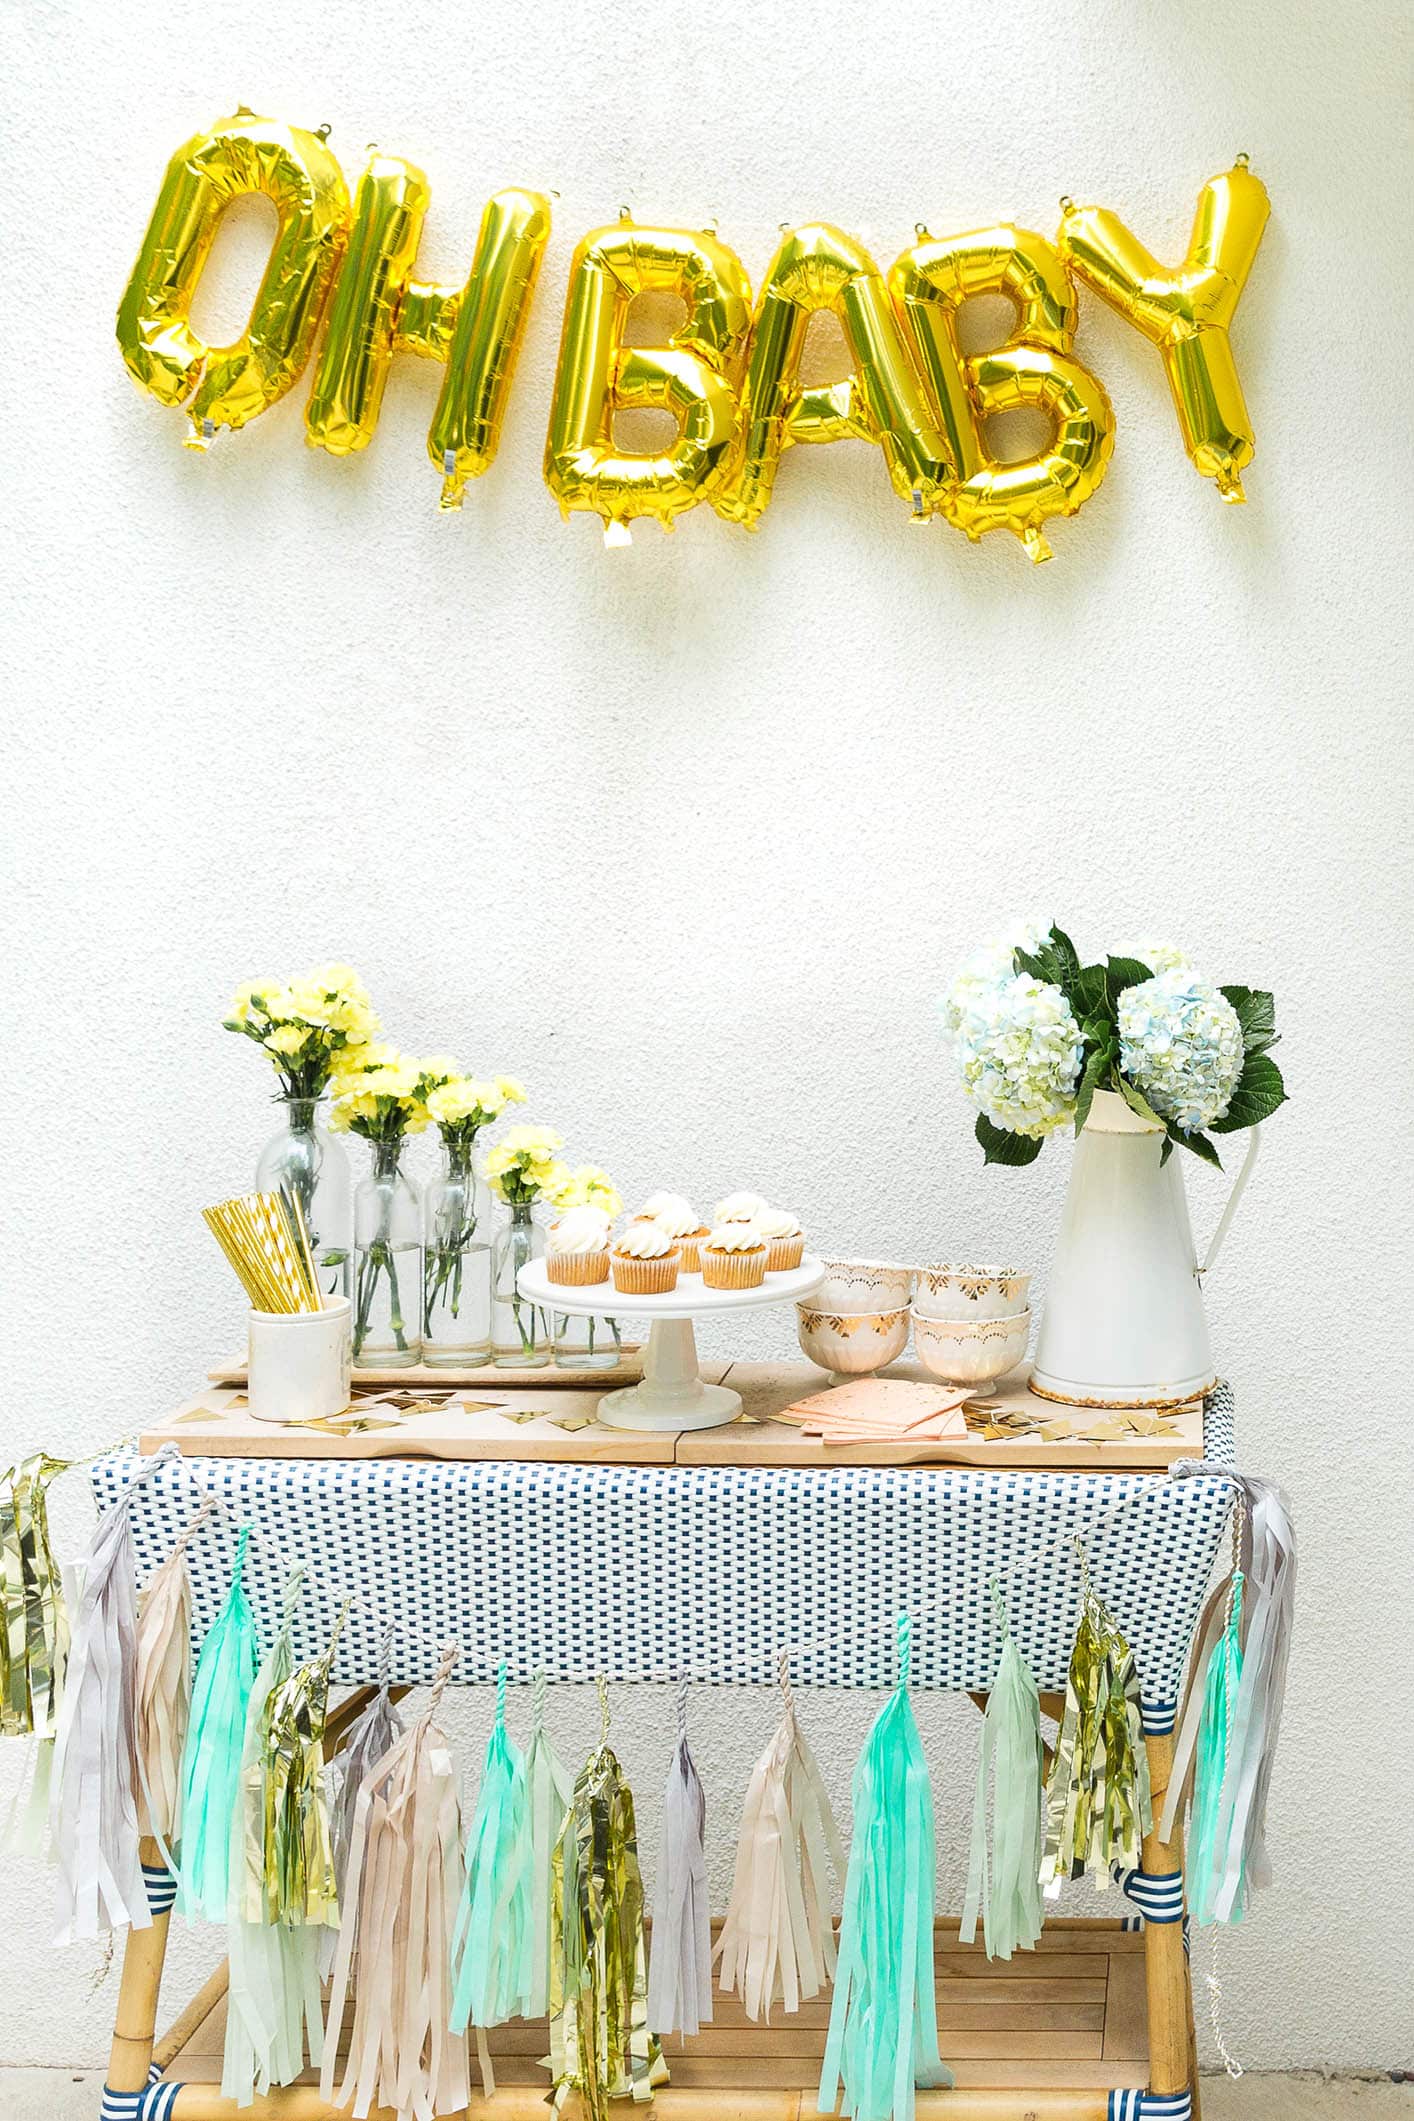 Louise Roe's Gender Reveal Party Decorations